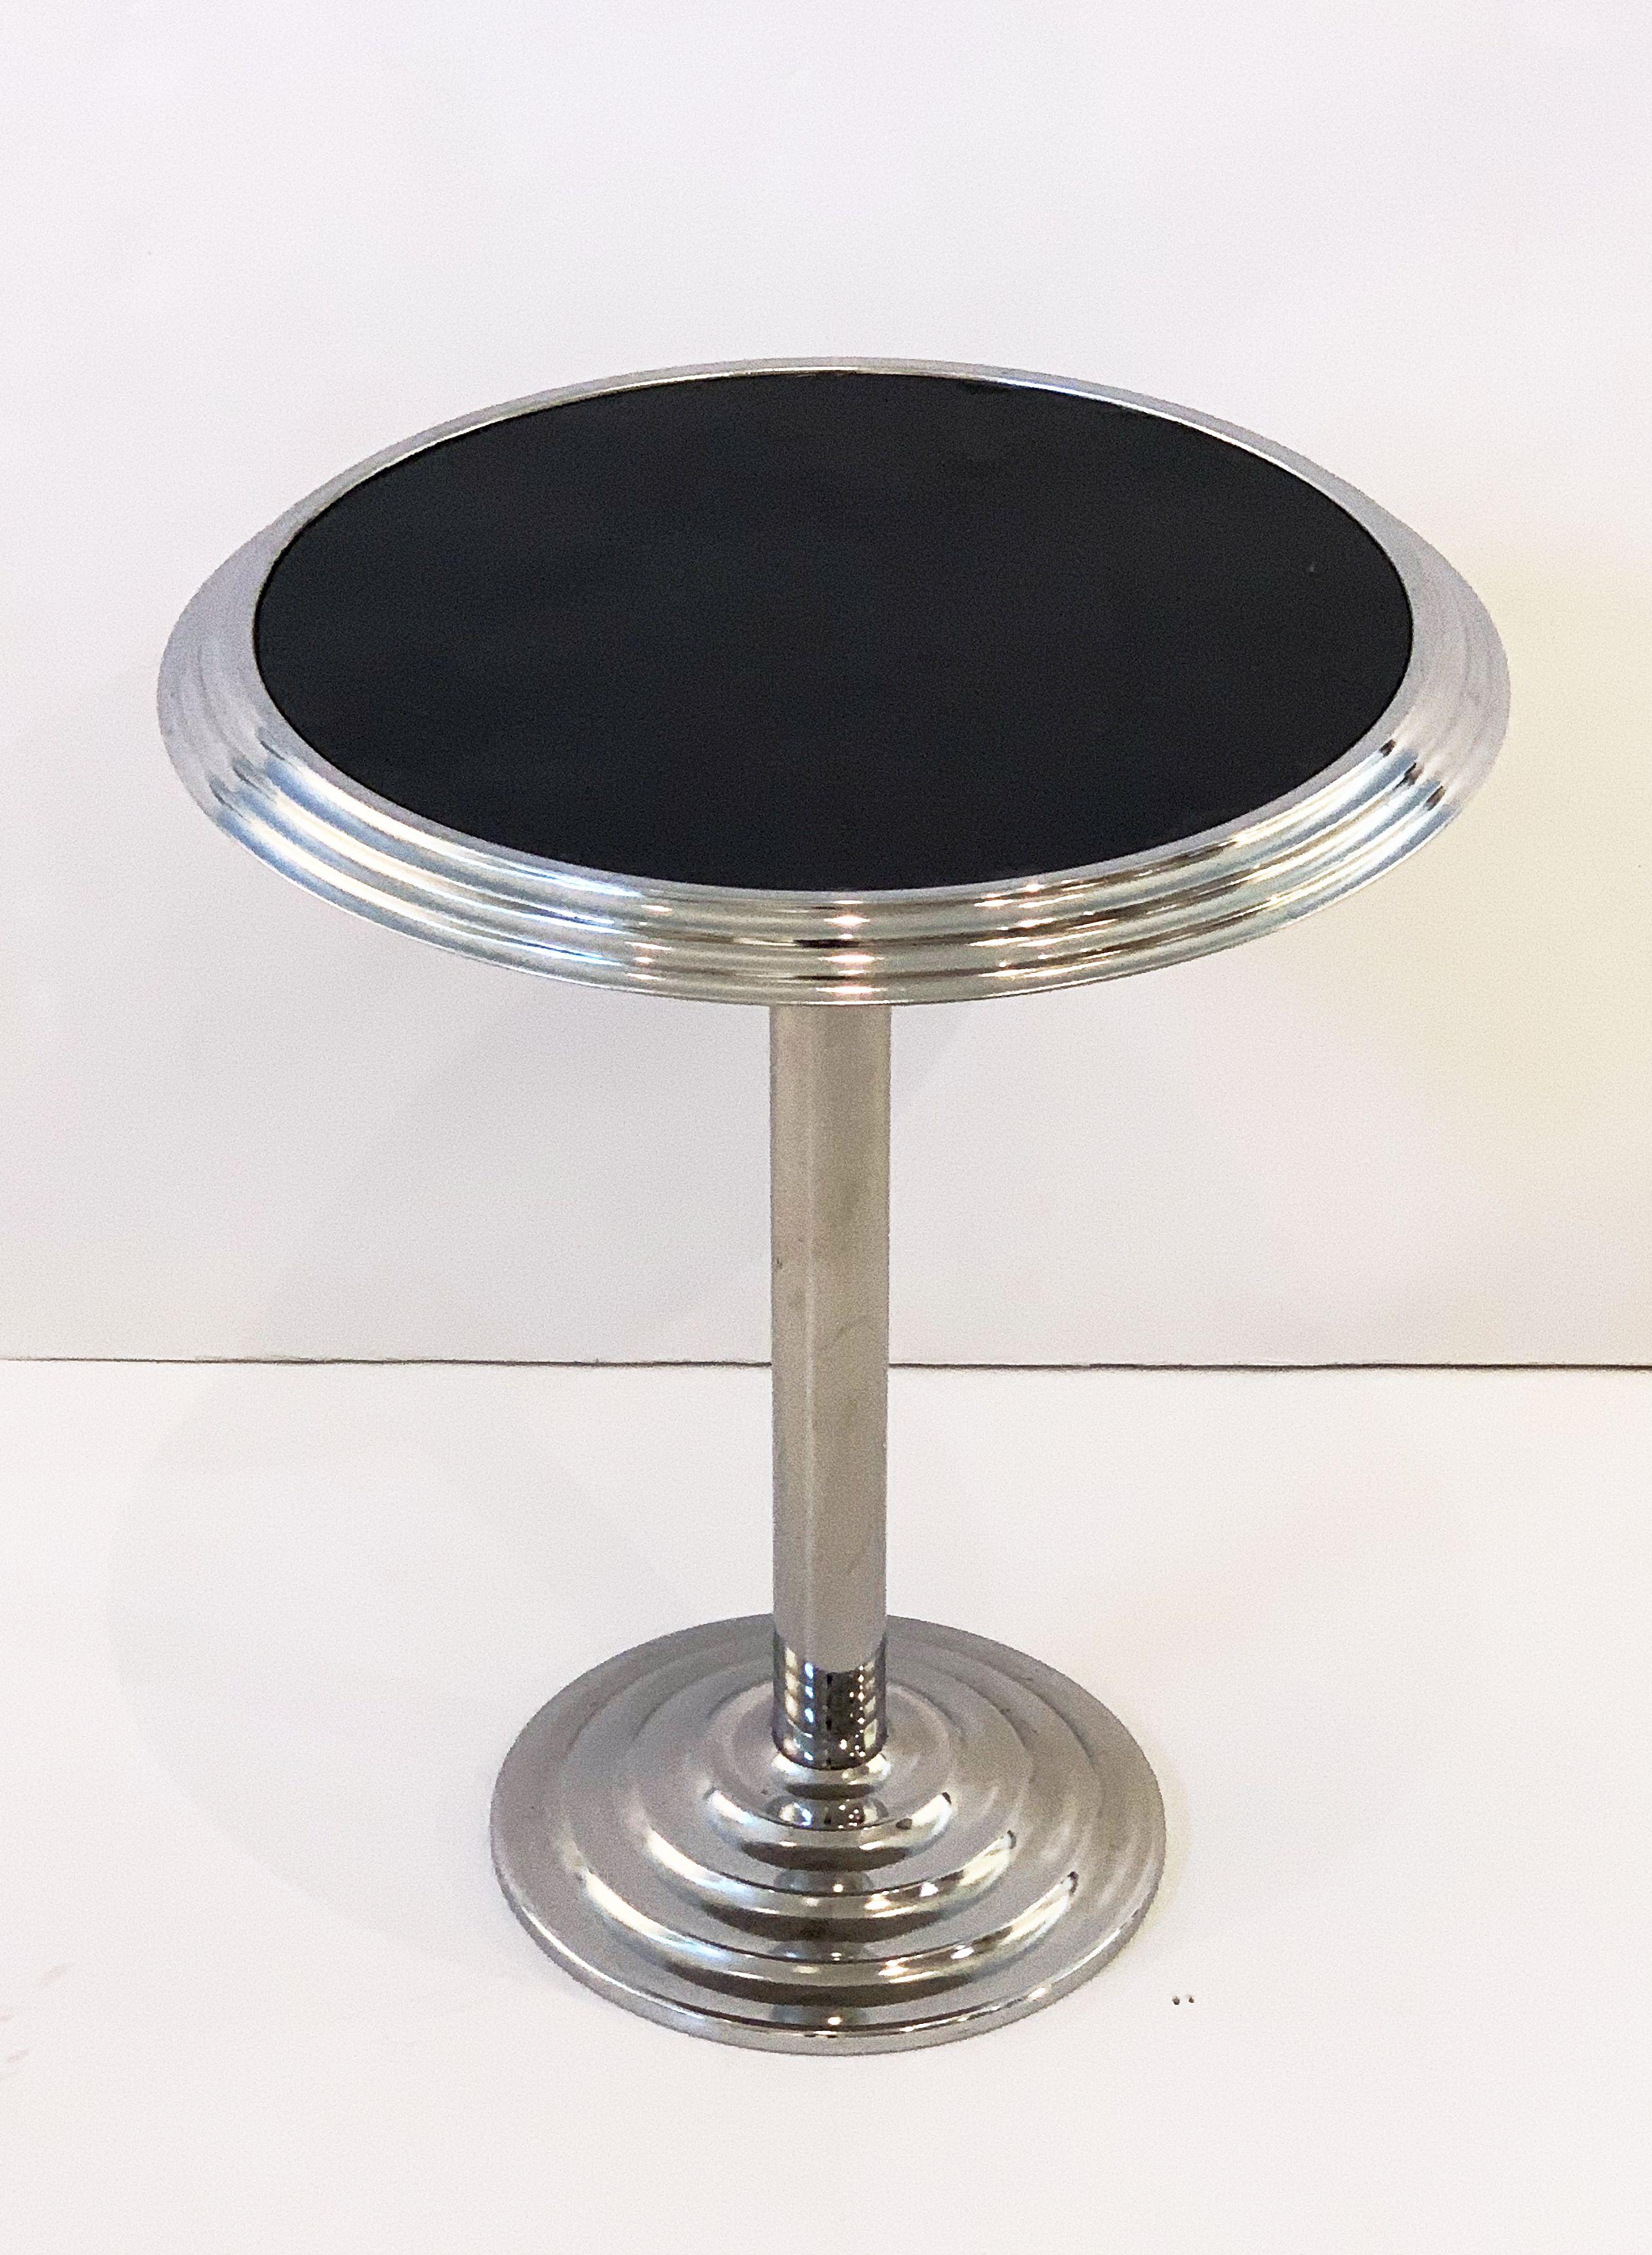 A fine French round bistro or pub table of chromed steel from the Art Deco period, featuring a circular graduated top with black center overlay of man-made materials, mounted to a column pedestal with graduated concentric base.